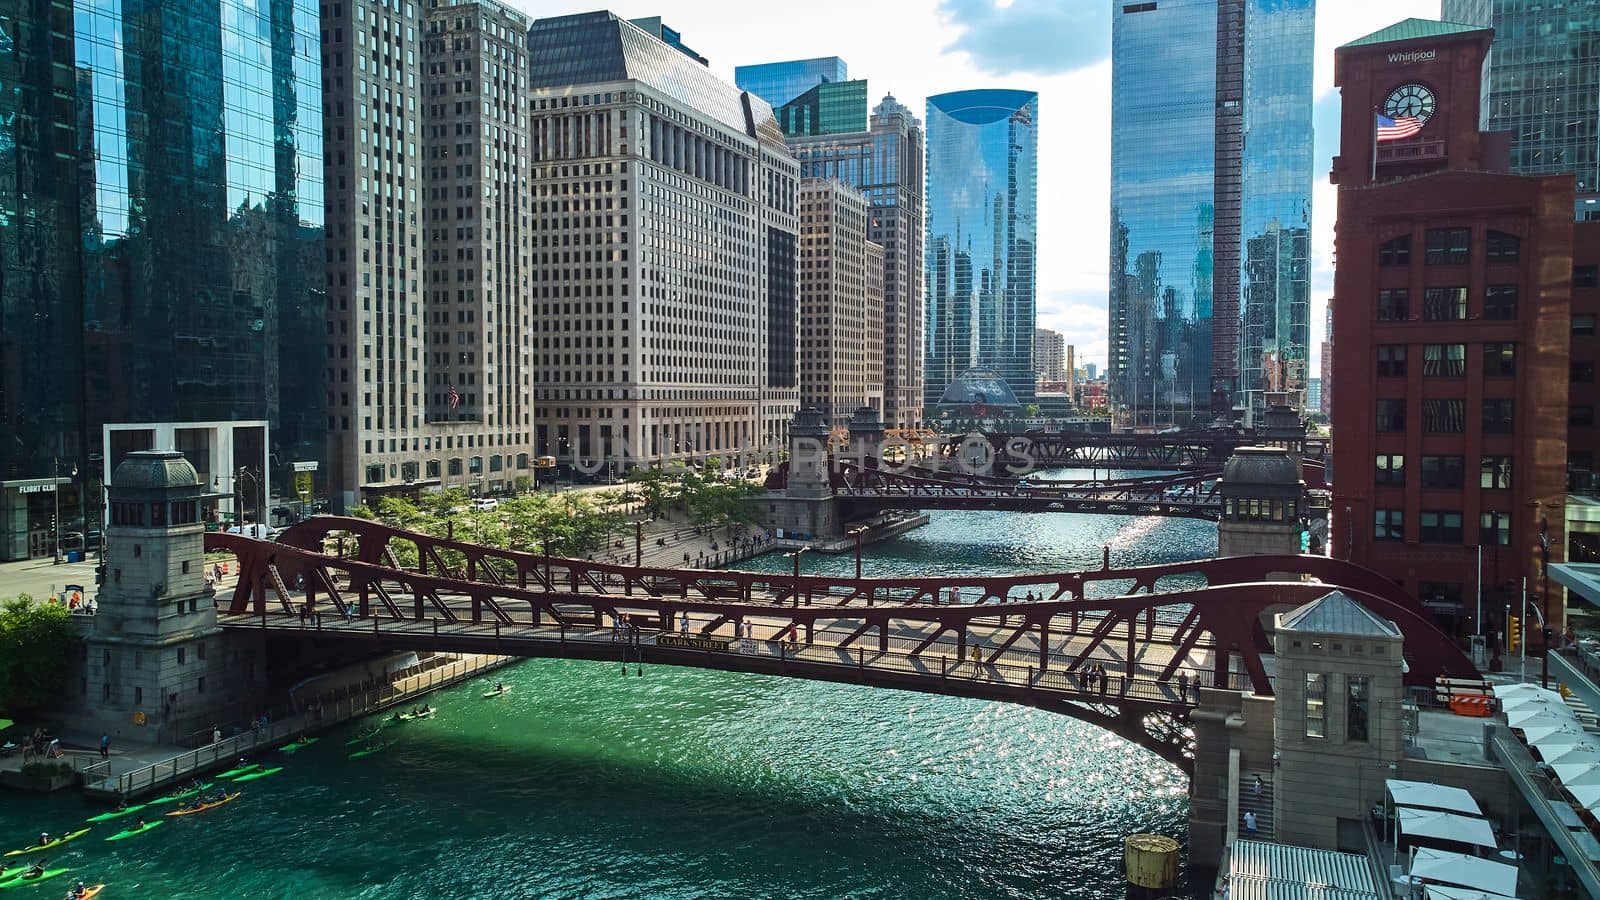 Image of Beautiful aerial view of bridge over Chicago ship canals surrounded by skyscrapers